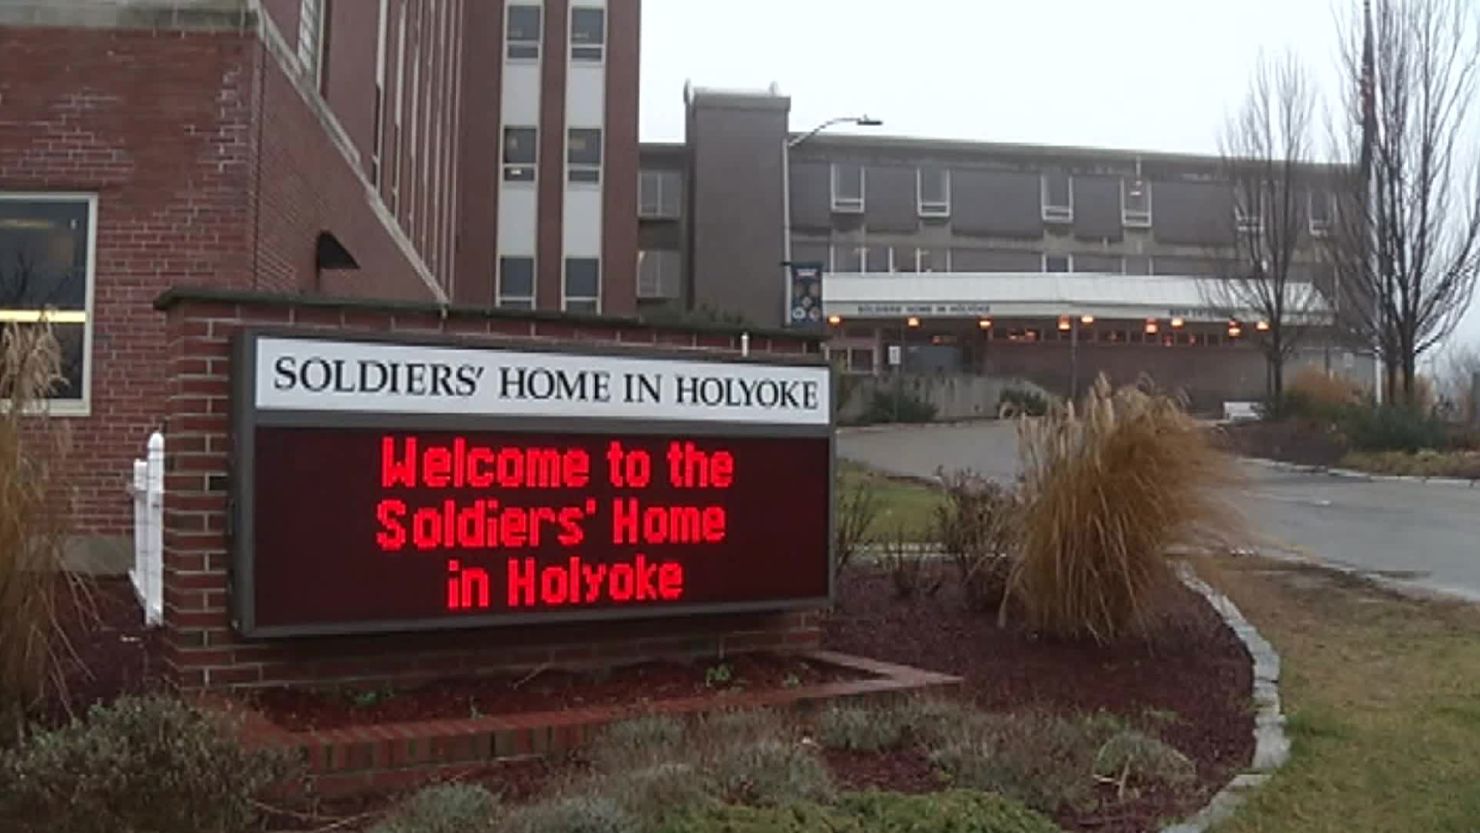 At least 12 veterans have died at Soldiers' Home in Holyoke, Massachusetts, from Covid-19.